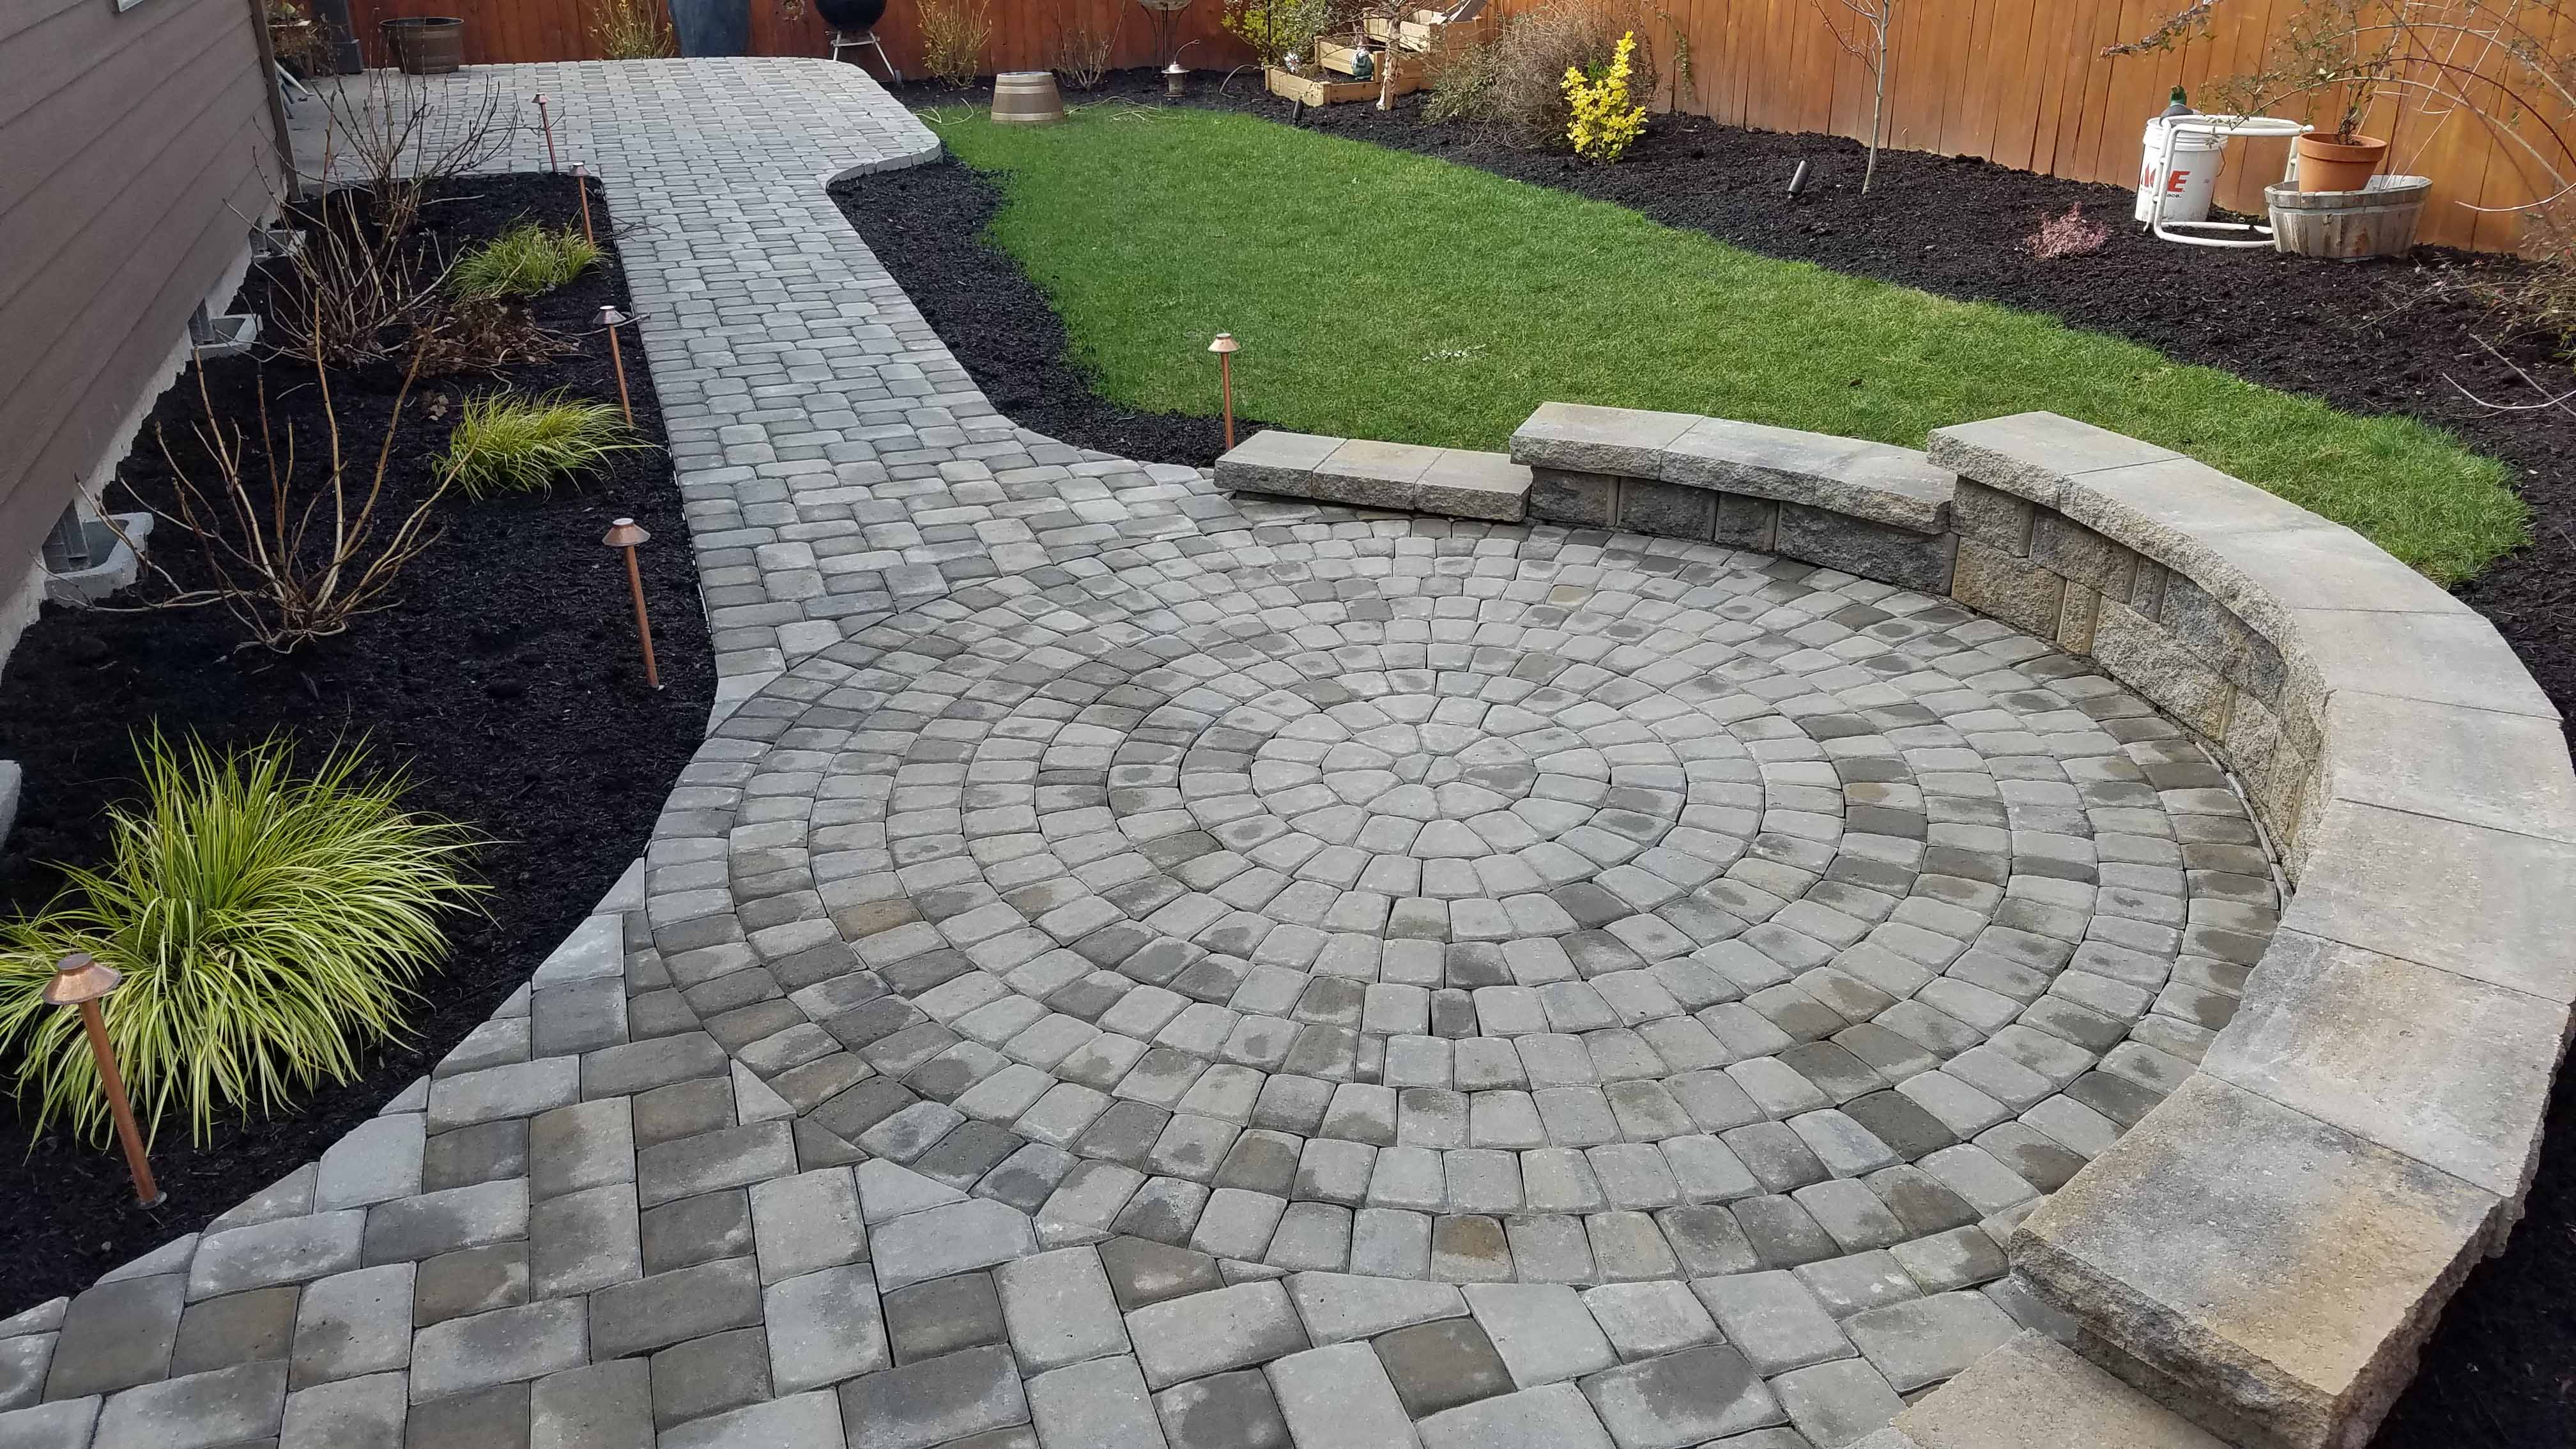 Brand new stone pathed patio with new plants in mulched area